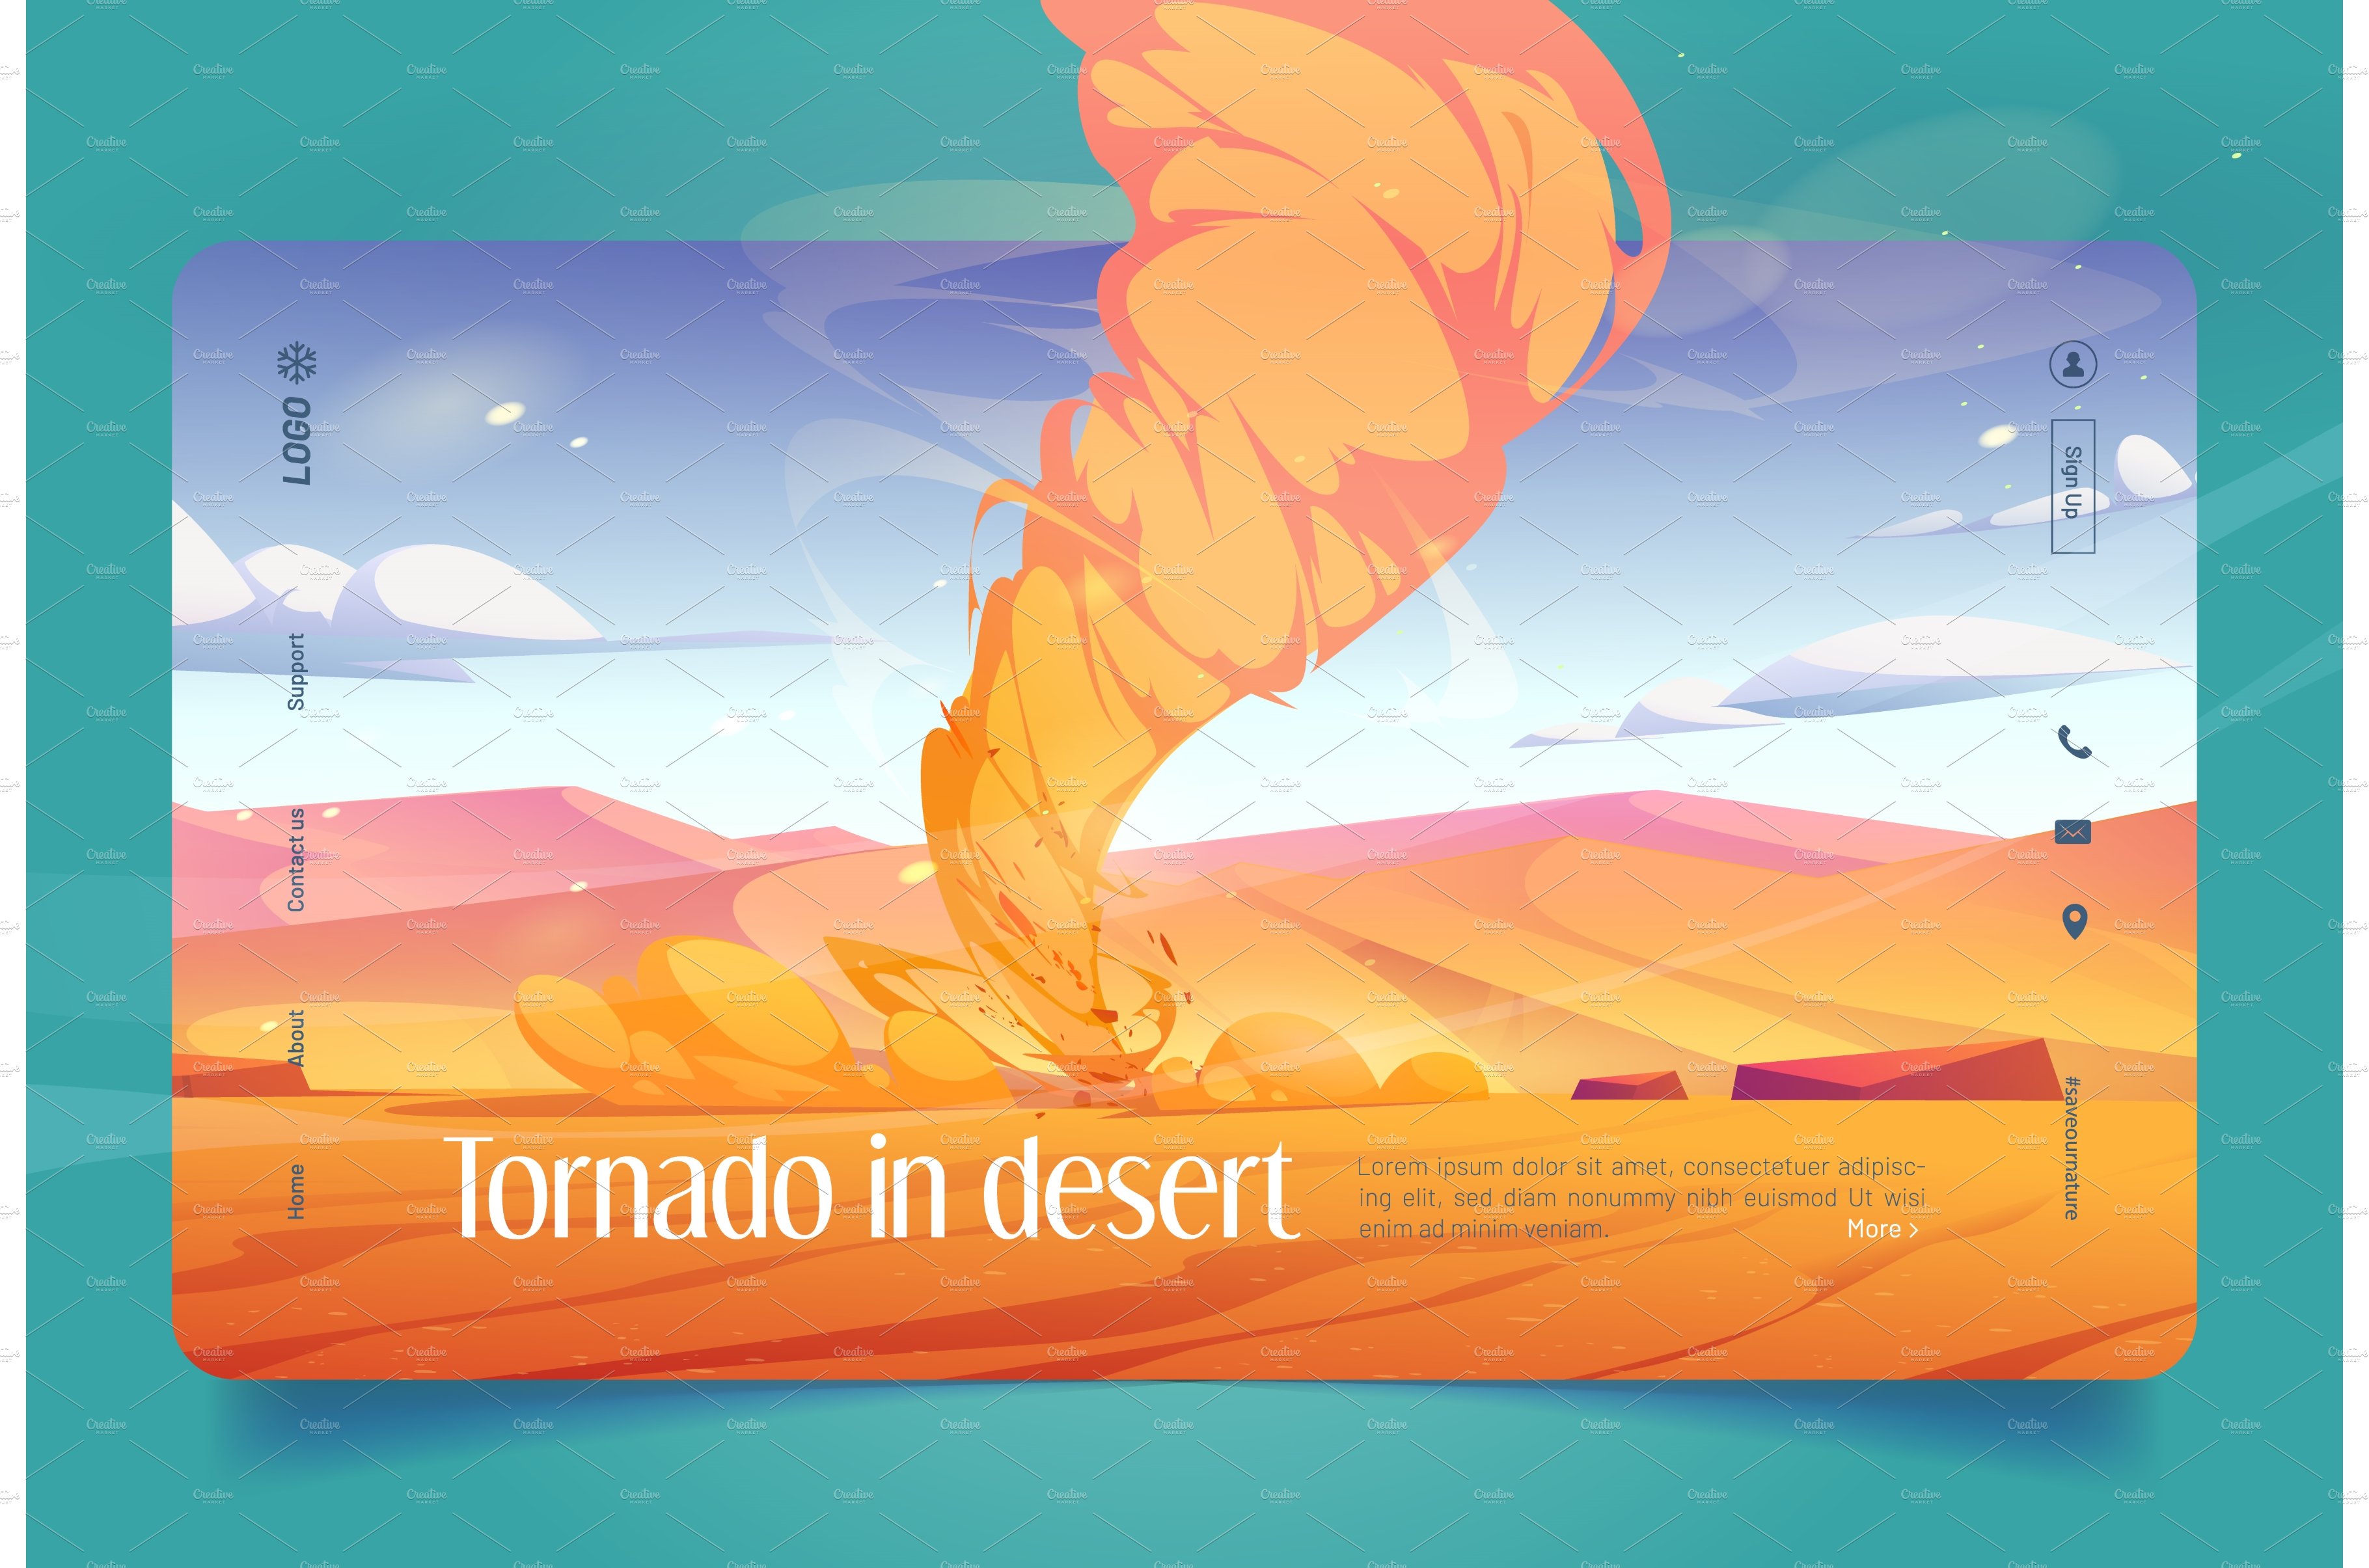 Tornado, sand whirlwind in desert cover image.